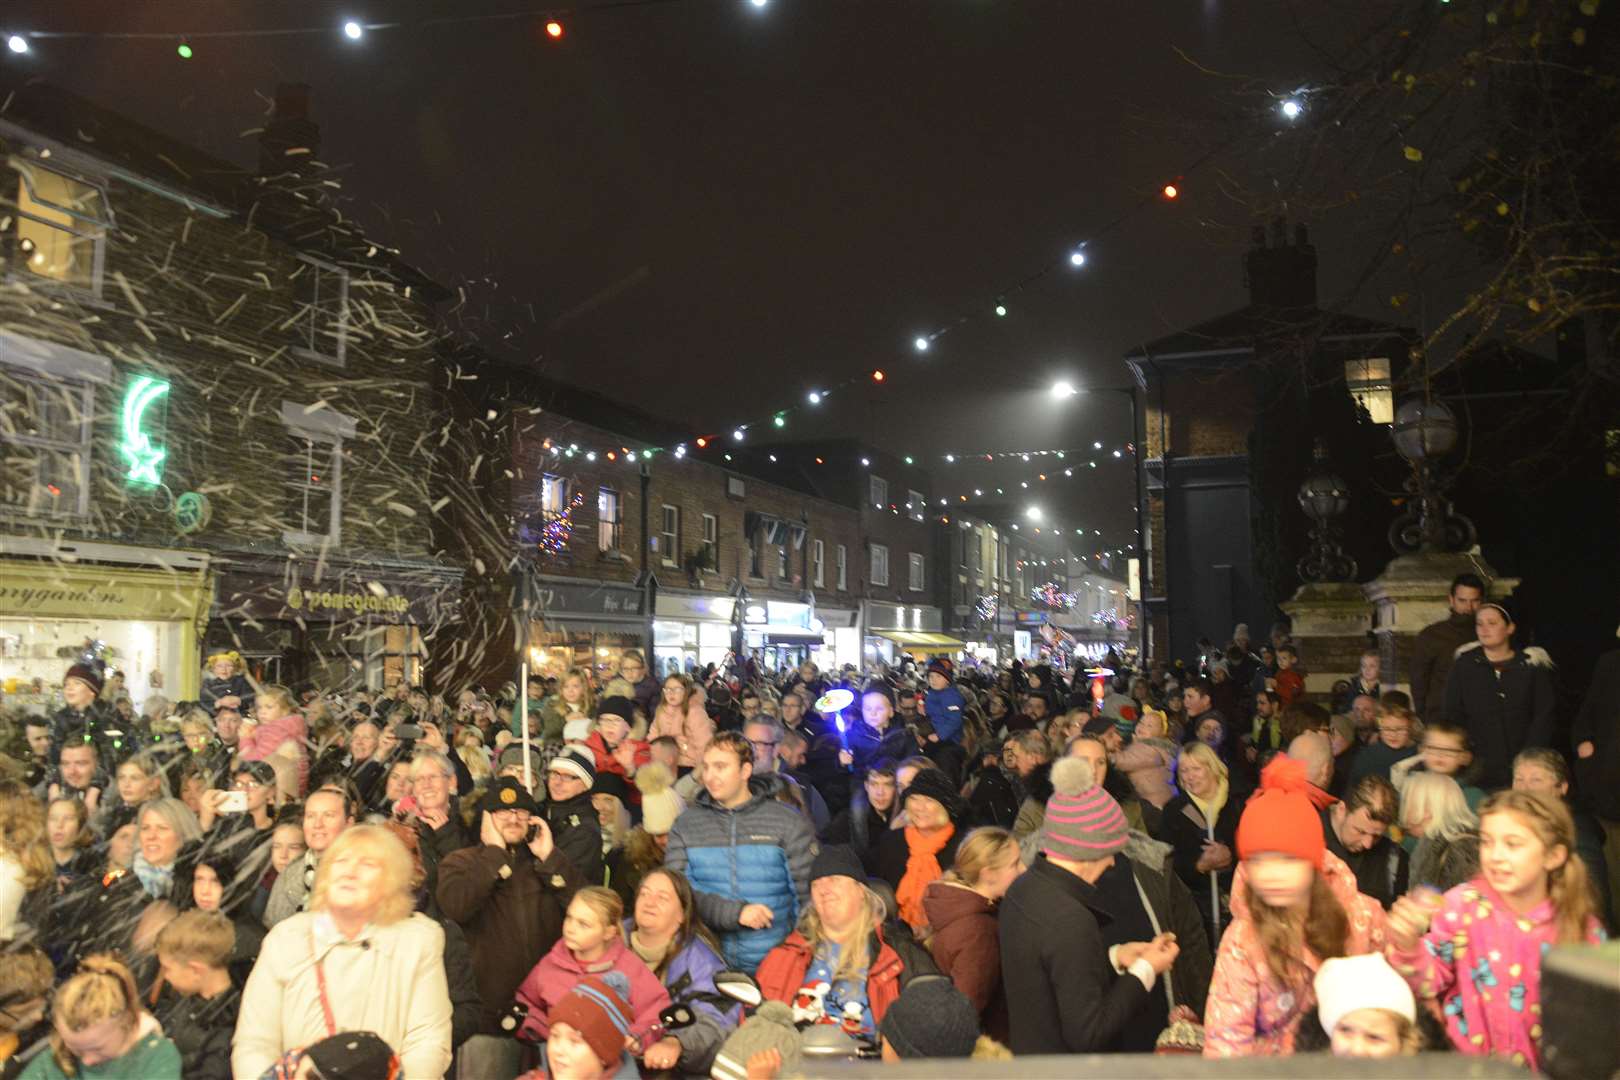 Records have been broken at an auction for Deal Christmas Lights